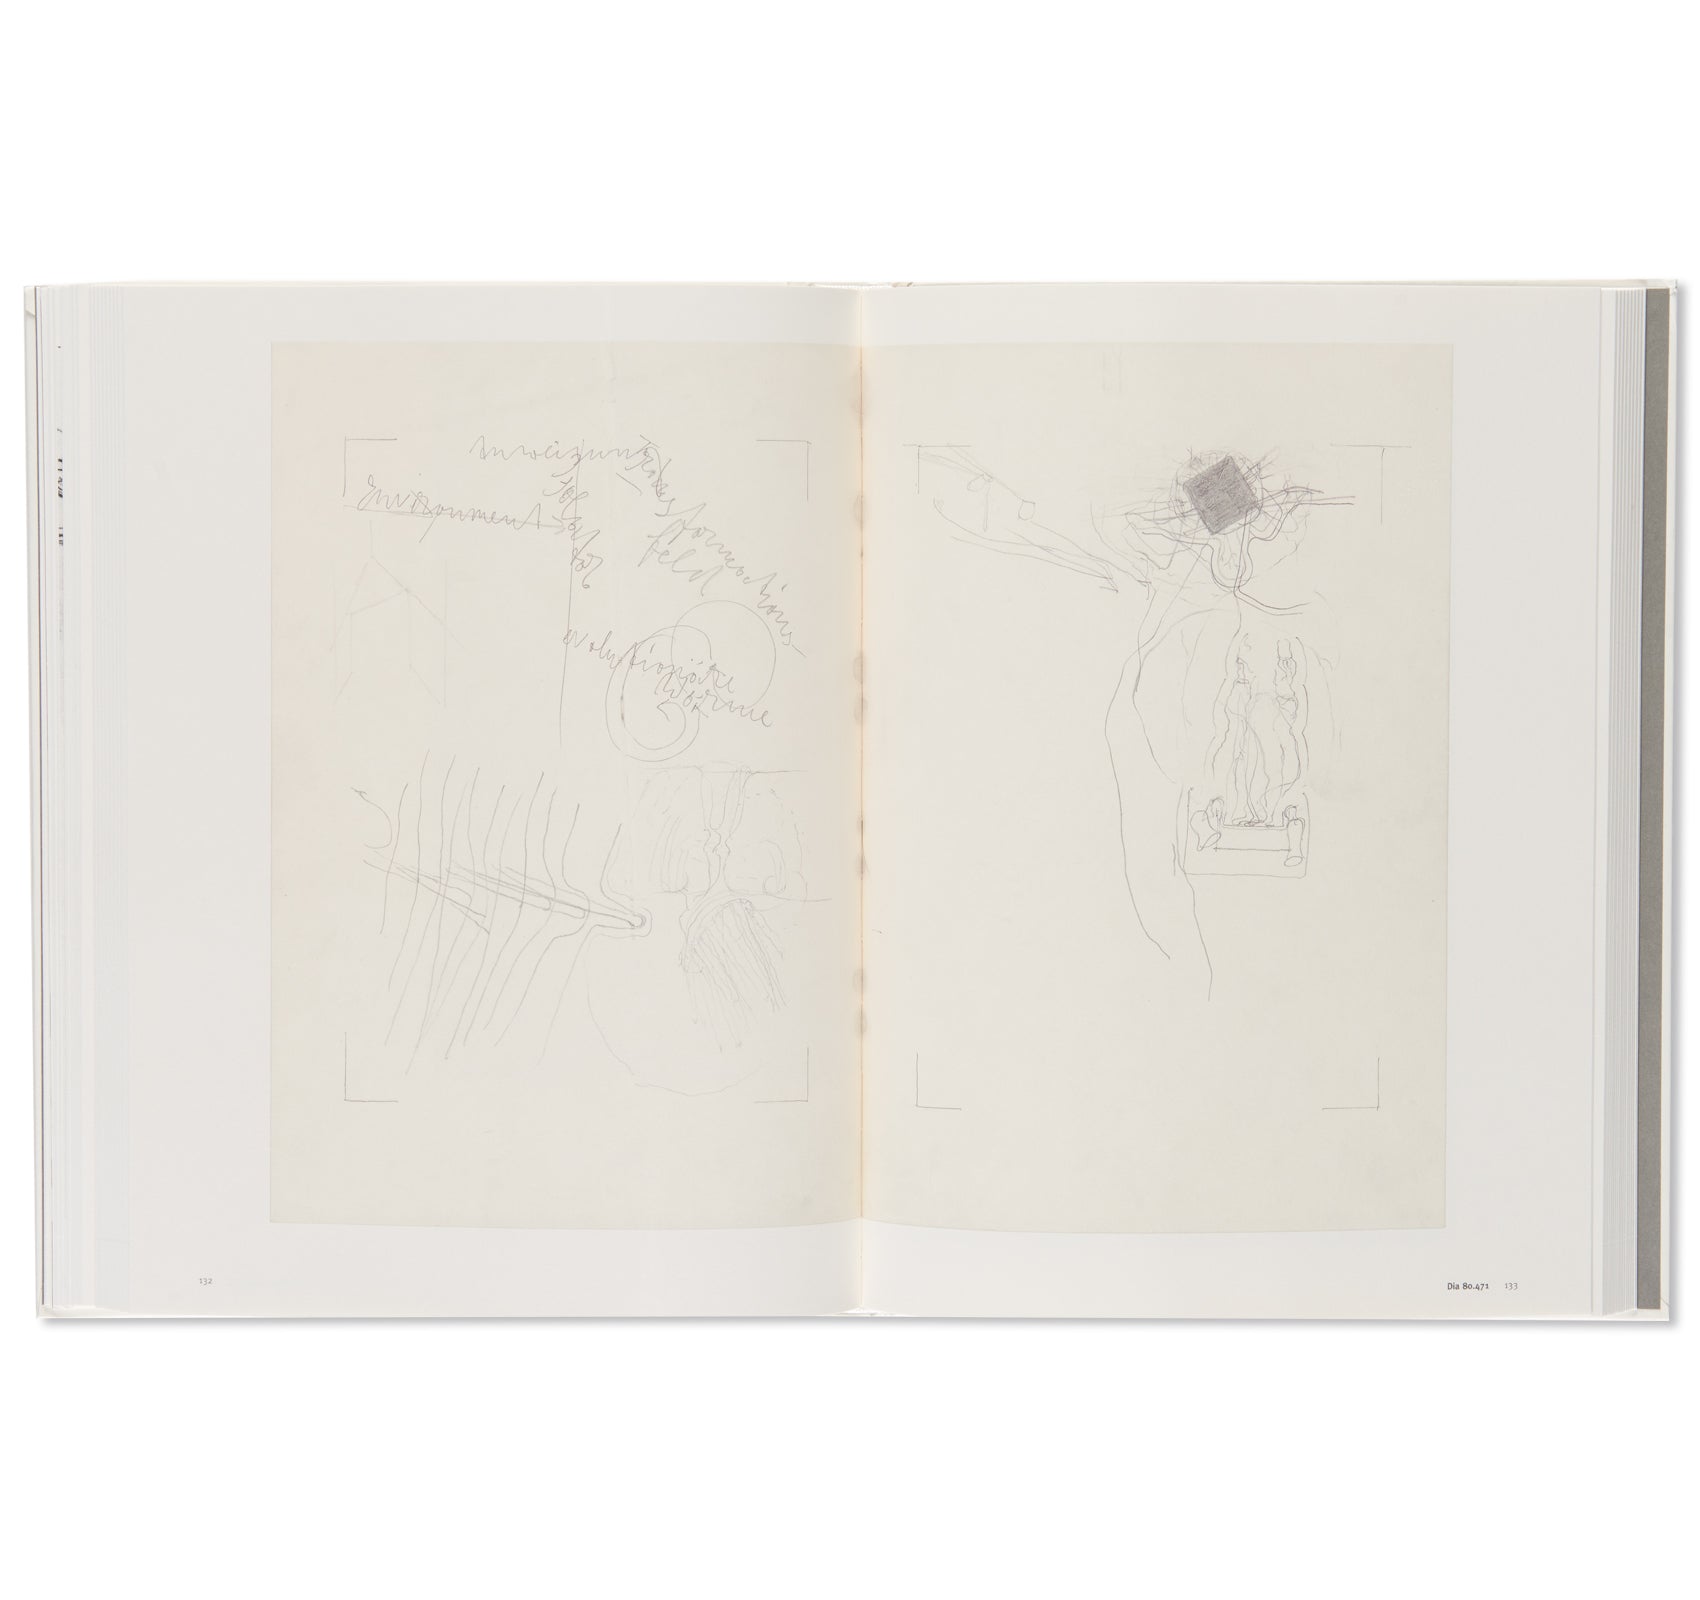 DRAWINGS AFTER THE CODICES MADRID OF LEONARDO DA VINCI by Joseph Beuys